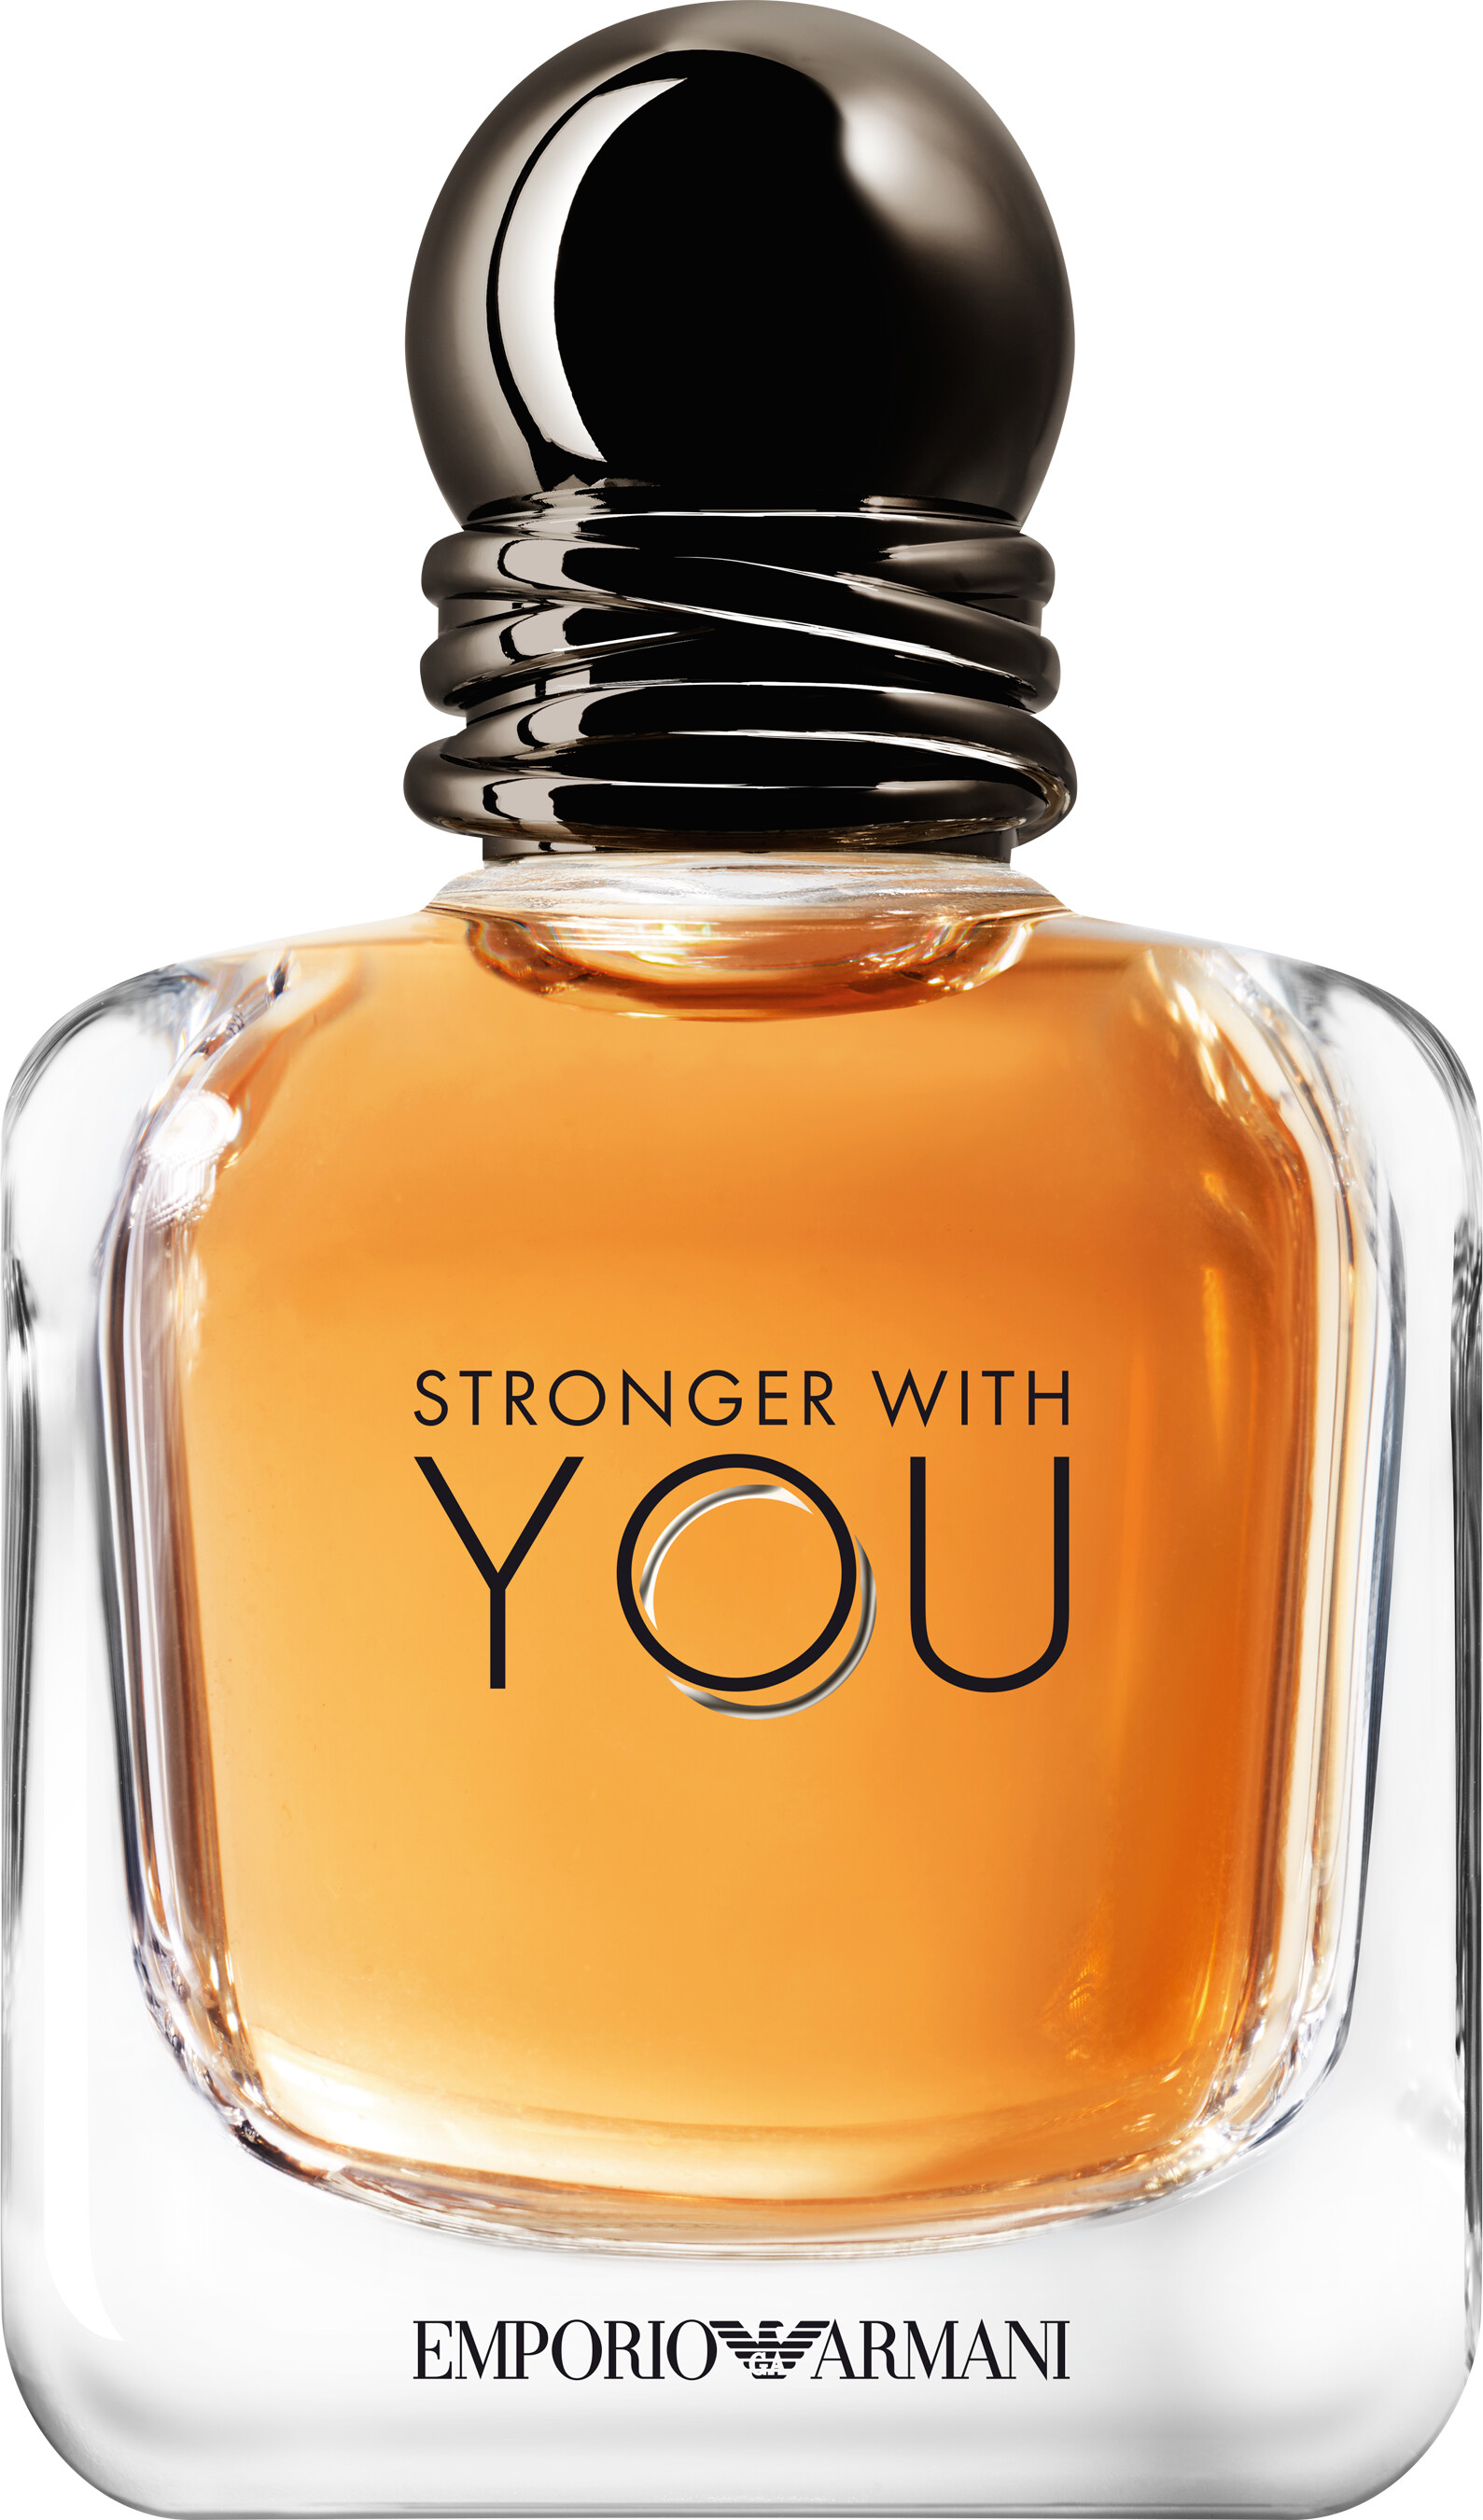 stronger with you 100ml